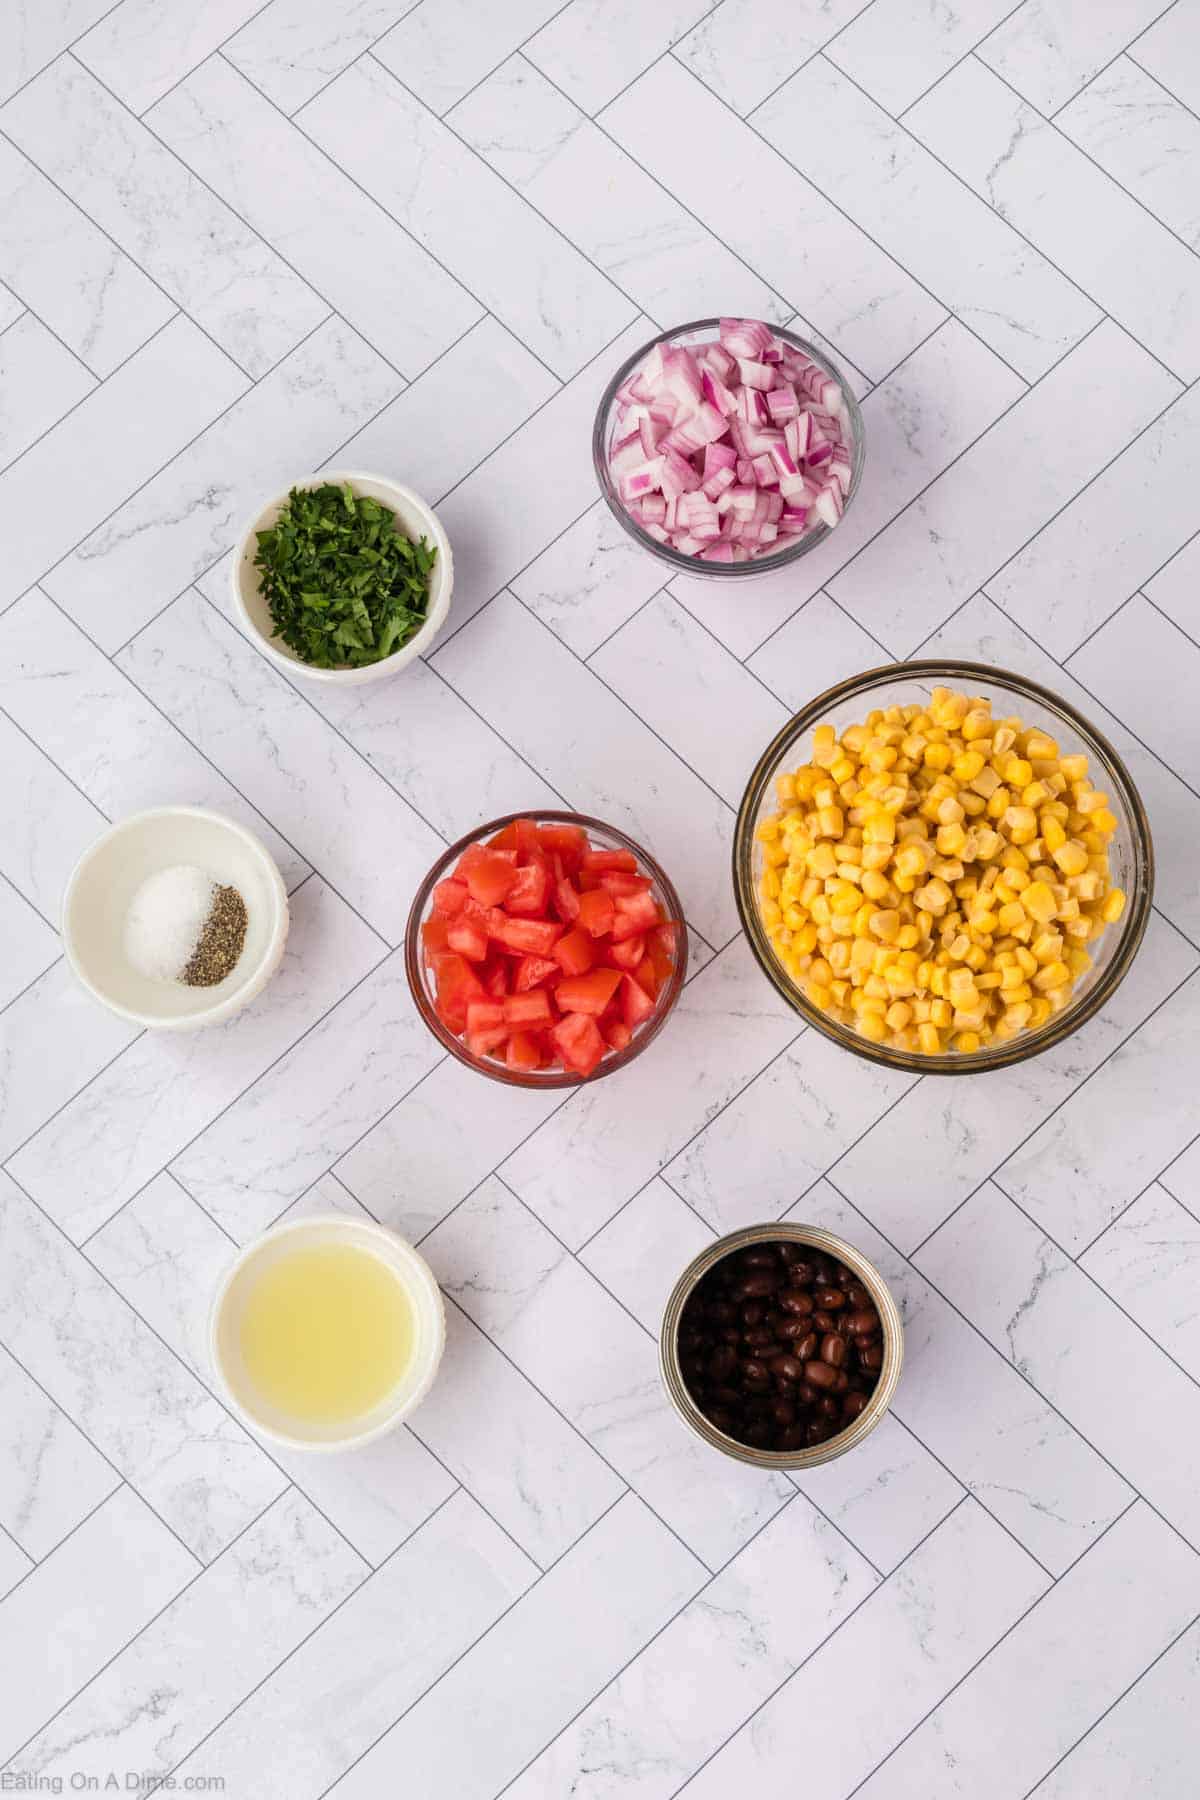 Ingredients for a delicious Black Bean Salsa are laid out on a white tiled surface. They include chopped red onions, corn, diced tomatoes, black beans, chopped cilantro in small bowls, ground black pepper and salt in a small dish, and lemon juice in a cup.